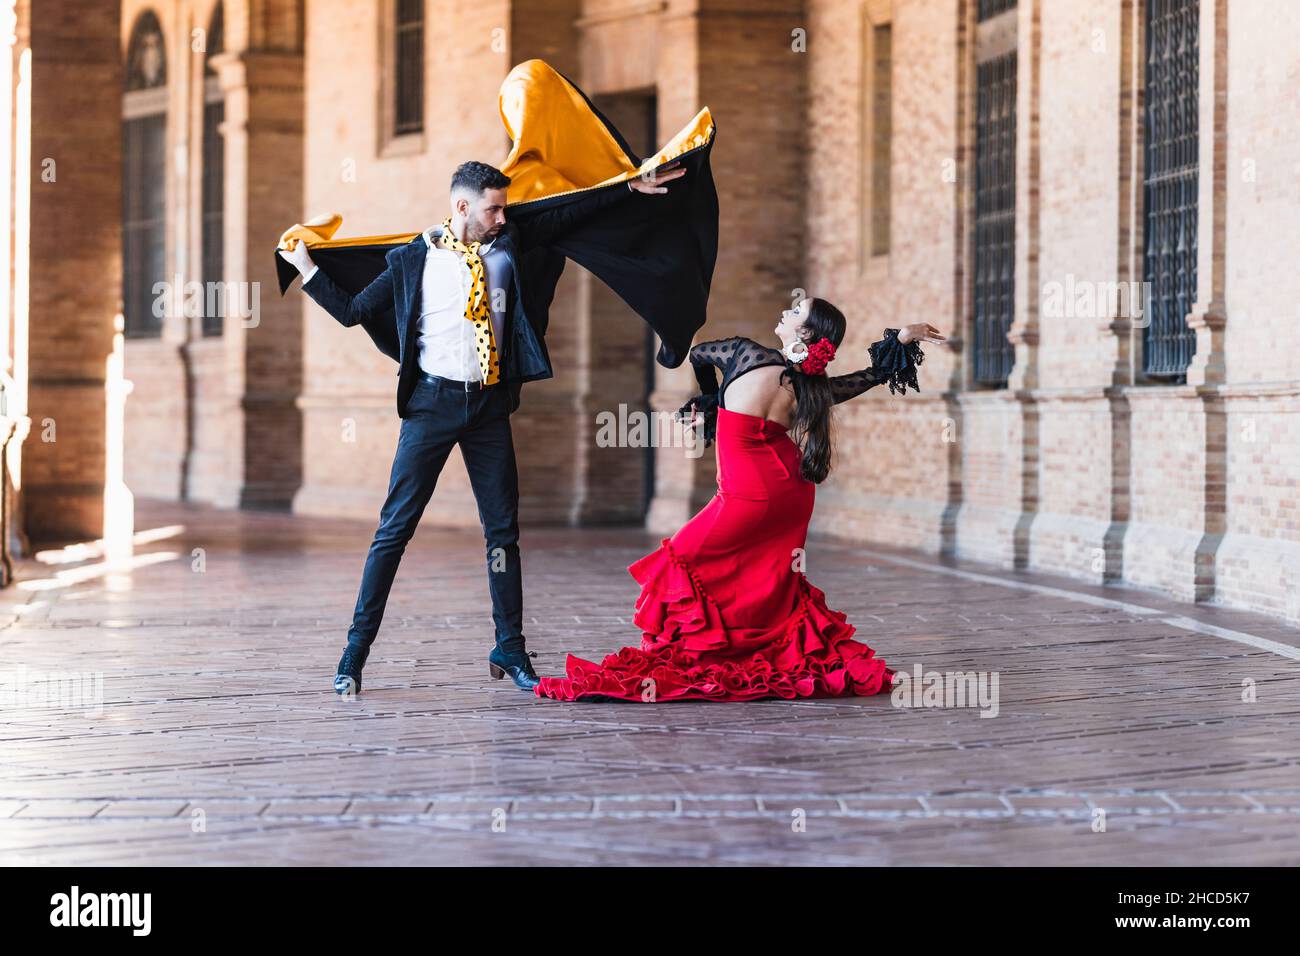 Man and woman in flamenco costume performing a dance outdoors Stock Photo